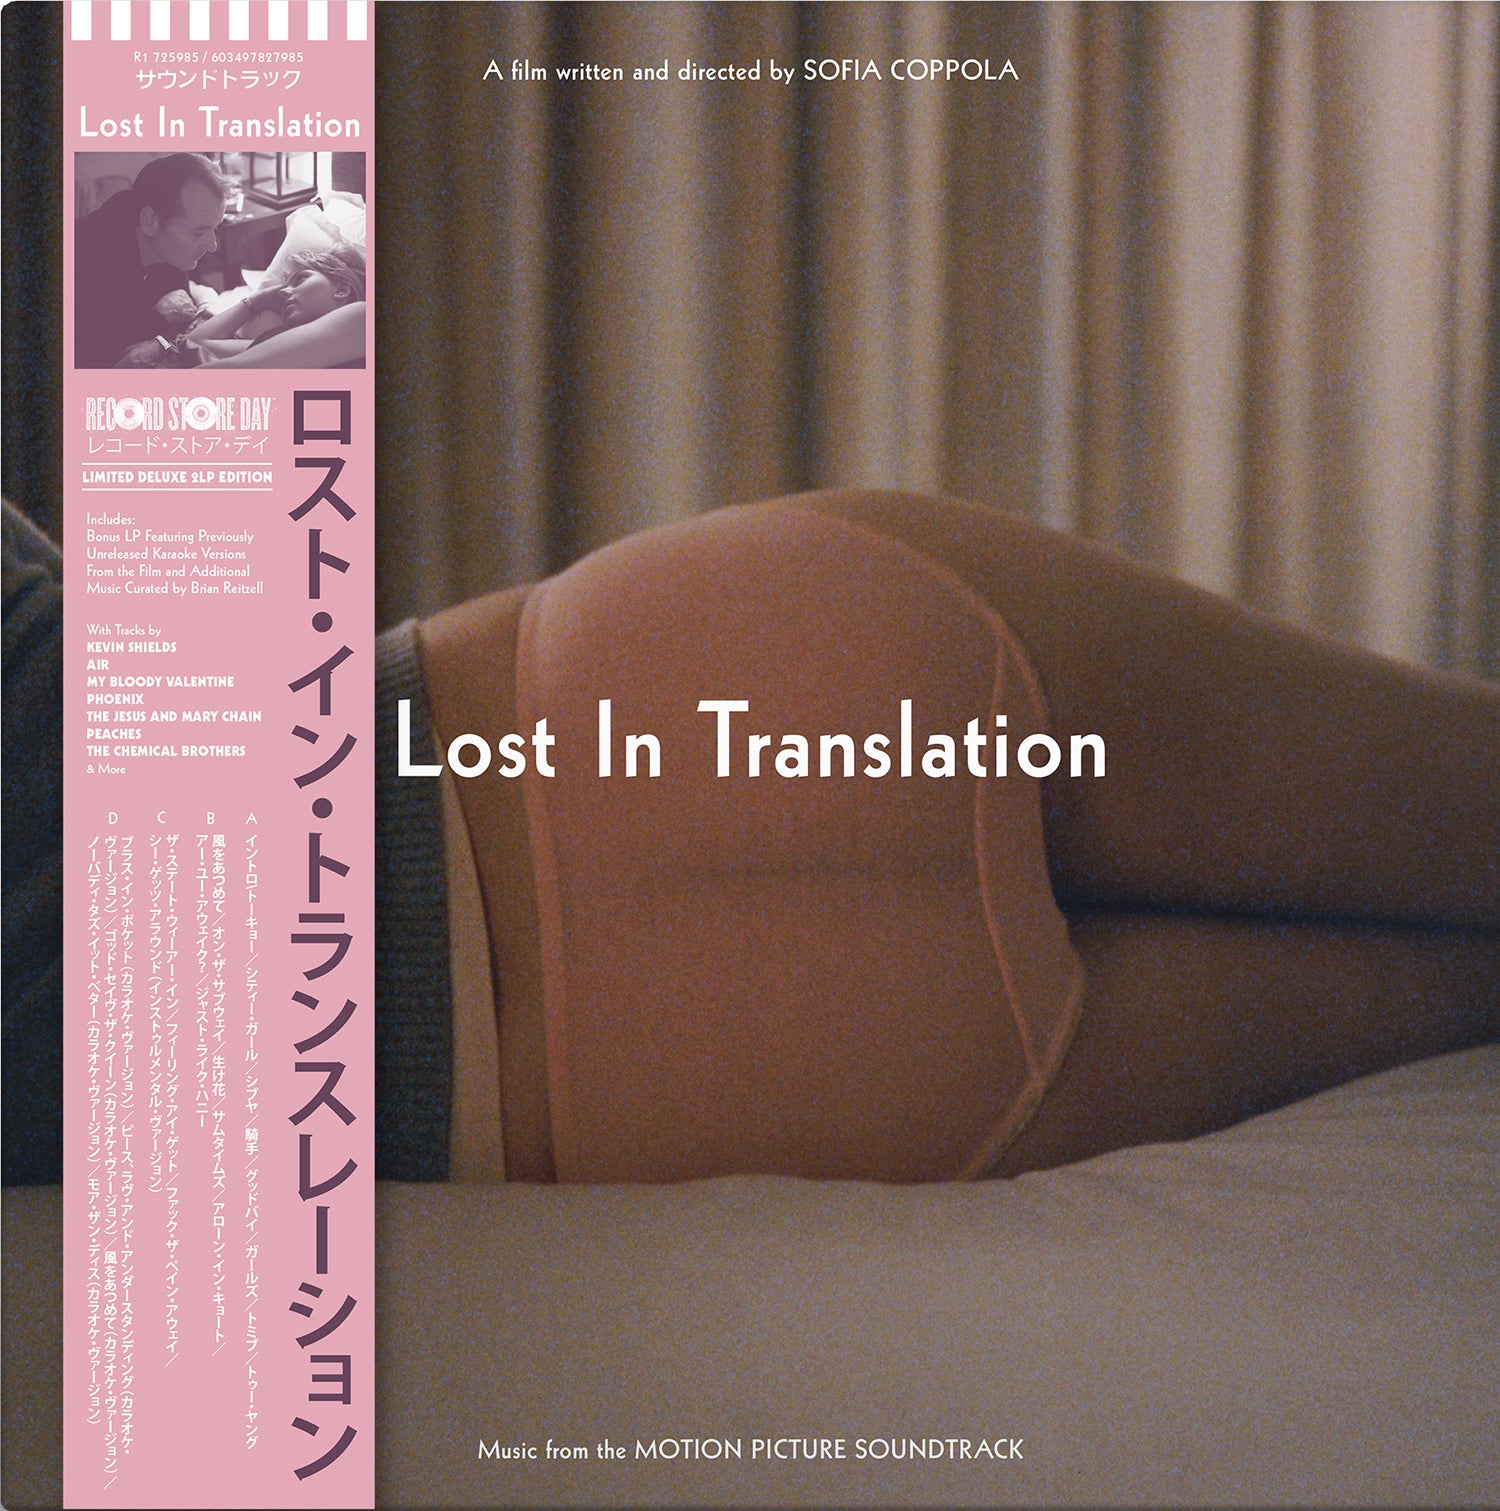 OST 'LOST IN TRANSLATION'